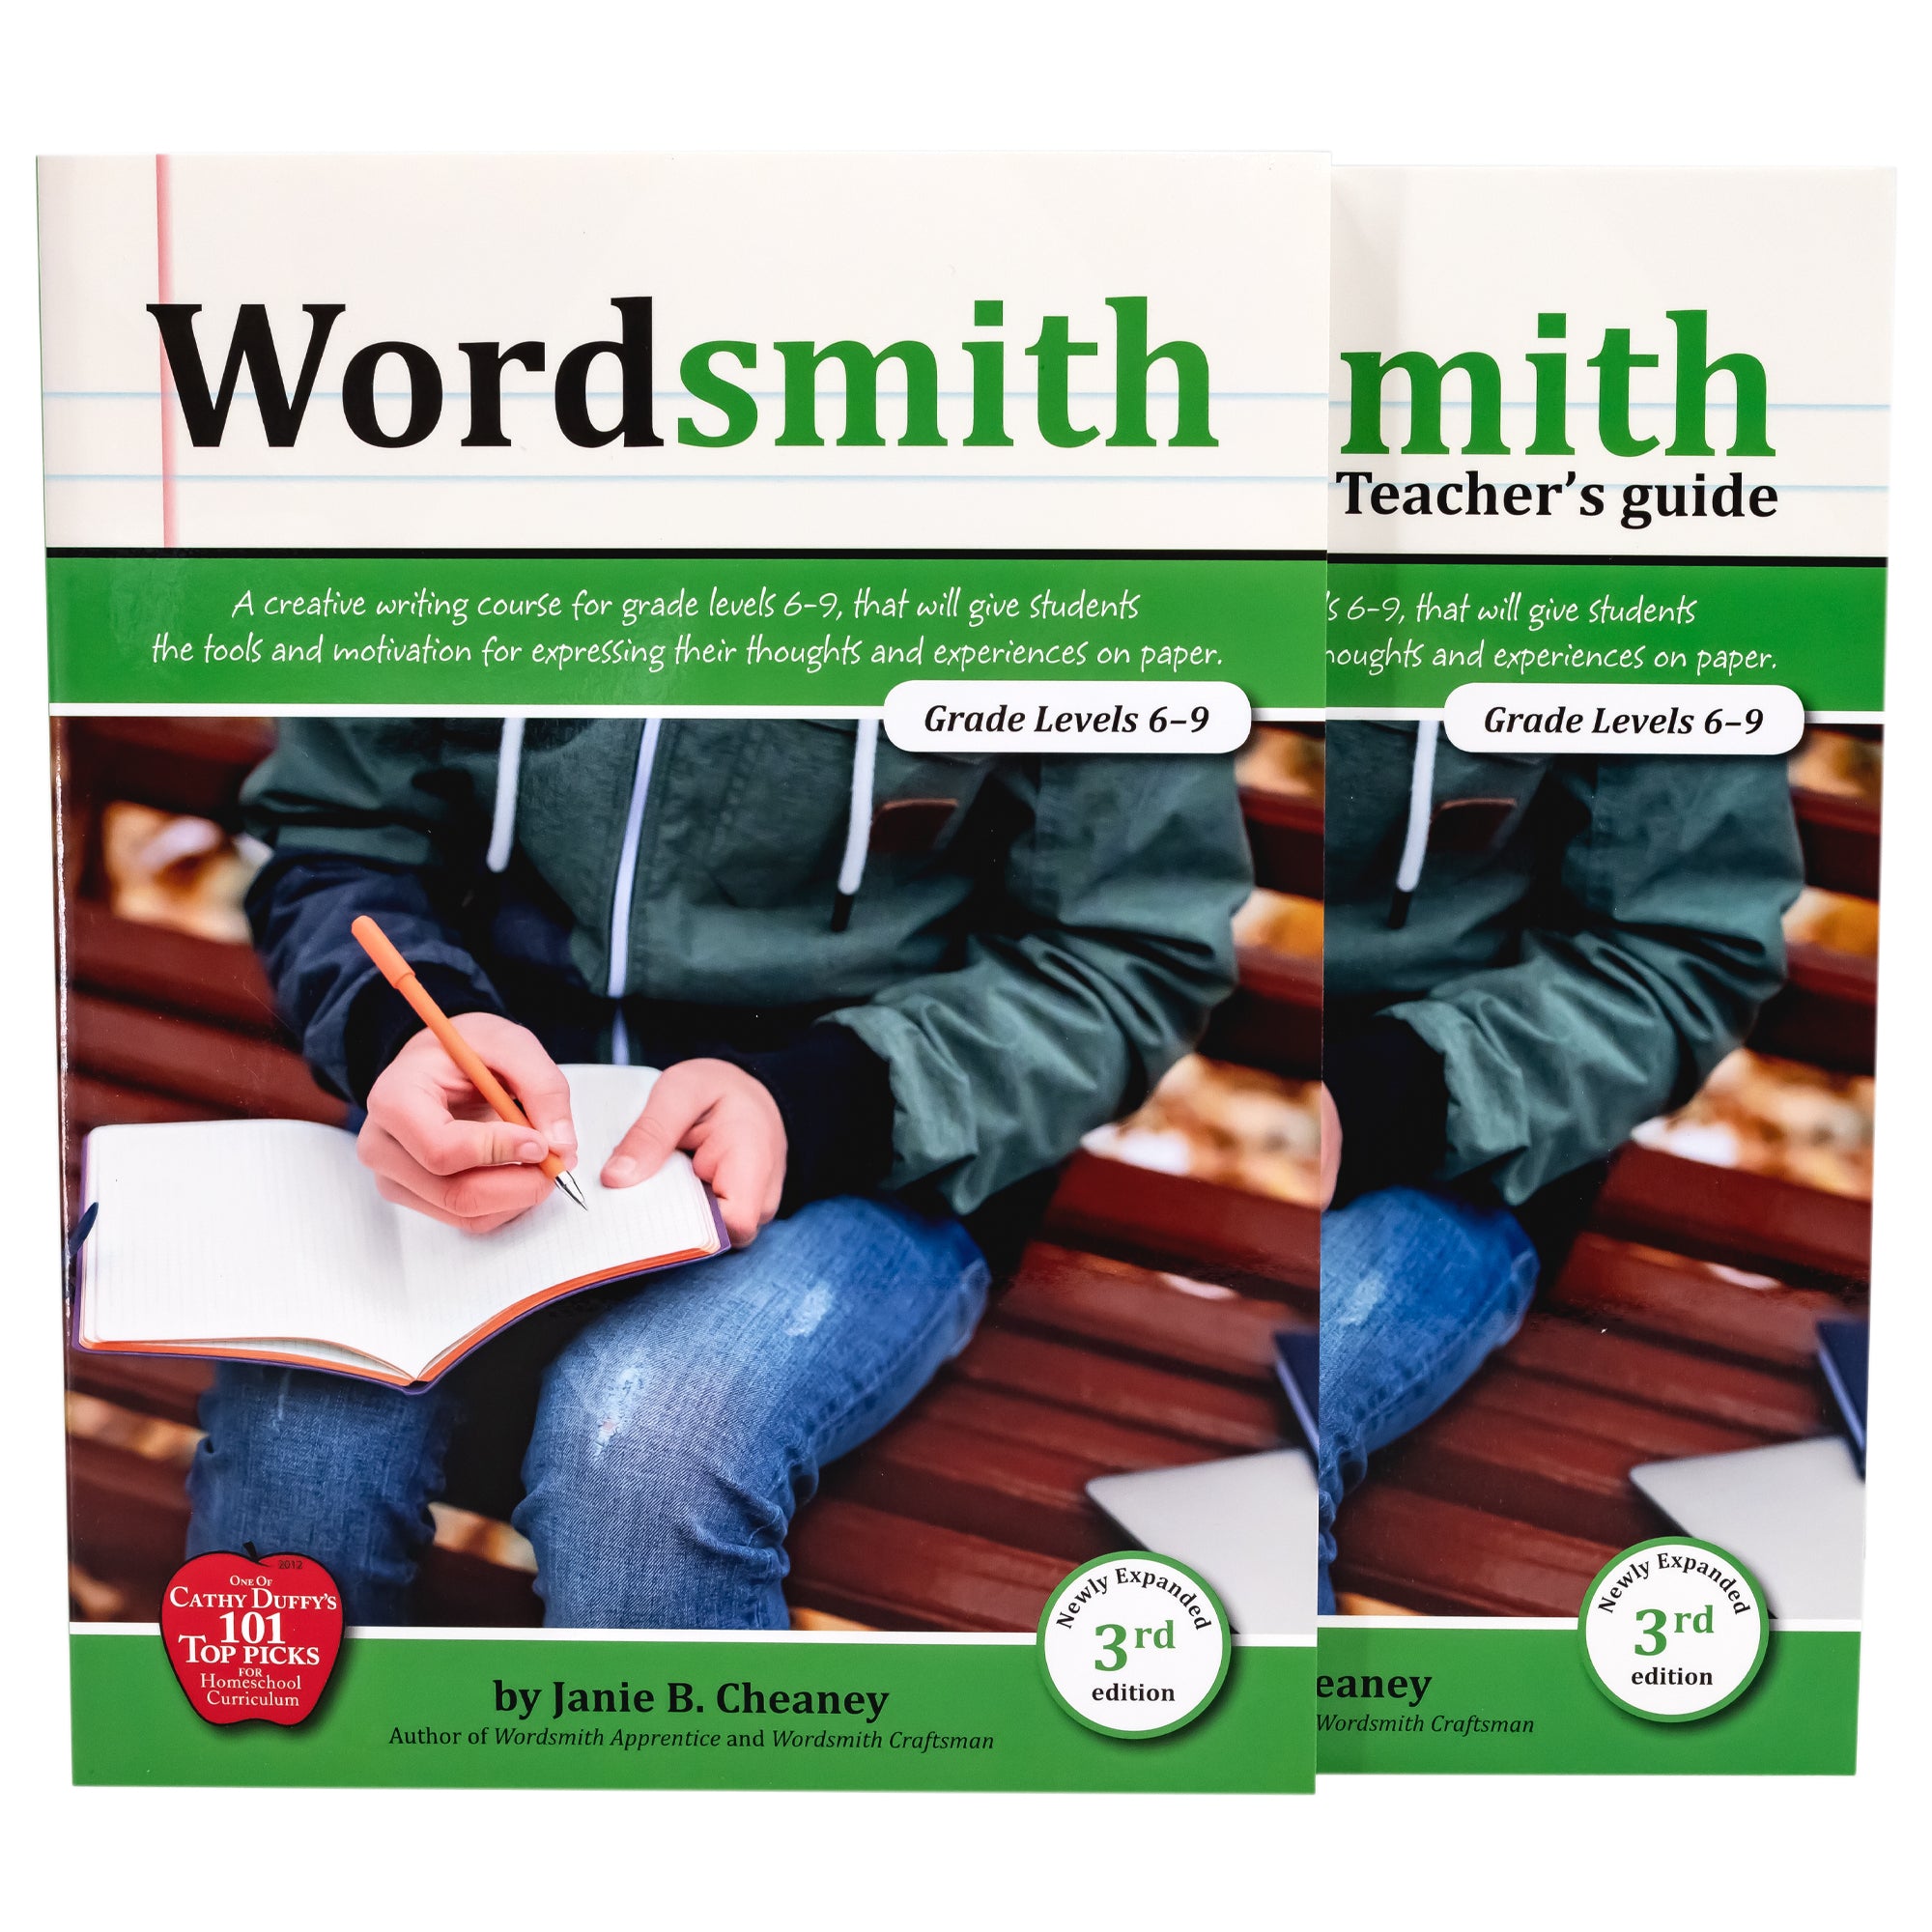 Wordsmith 2-book set. Both books have a background of notebook paper at the top and 2 green bands under. Between the green bands is a picture of a boy writing in a journal. Teacher's Guide is to the right and tucked behind the student book.